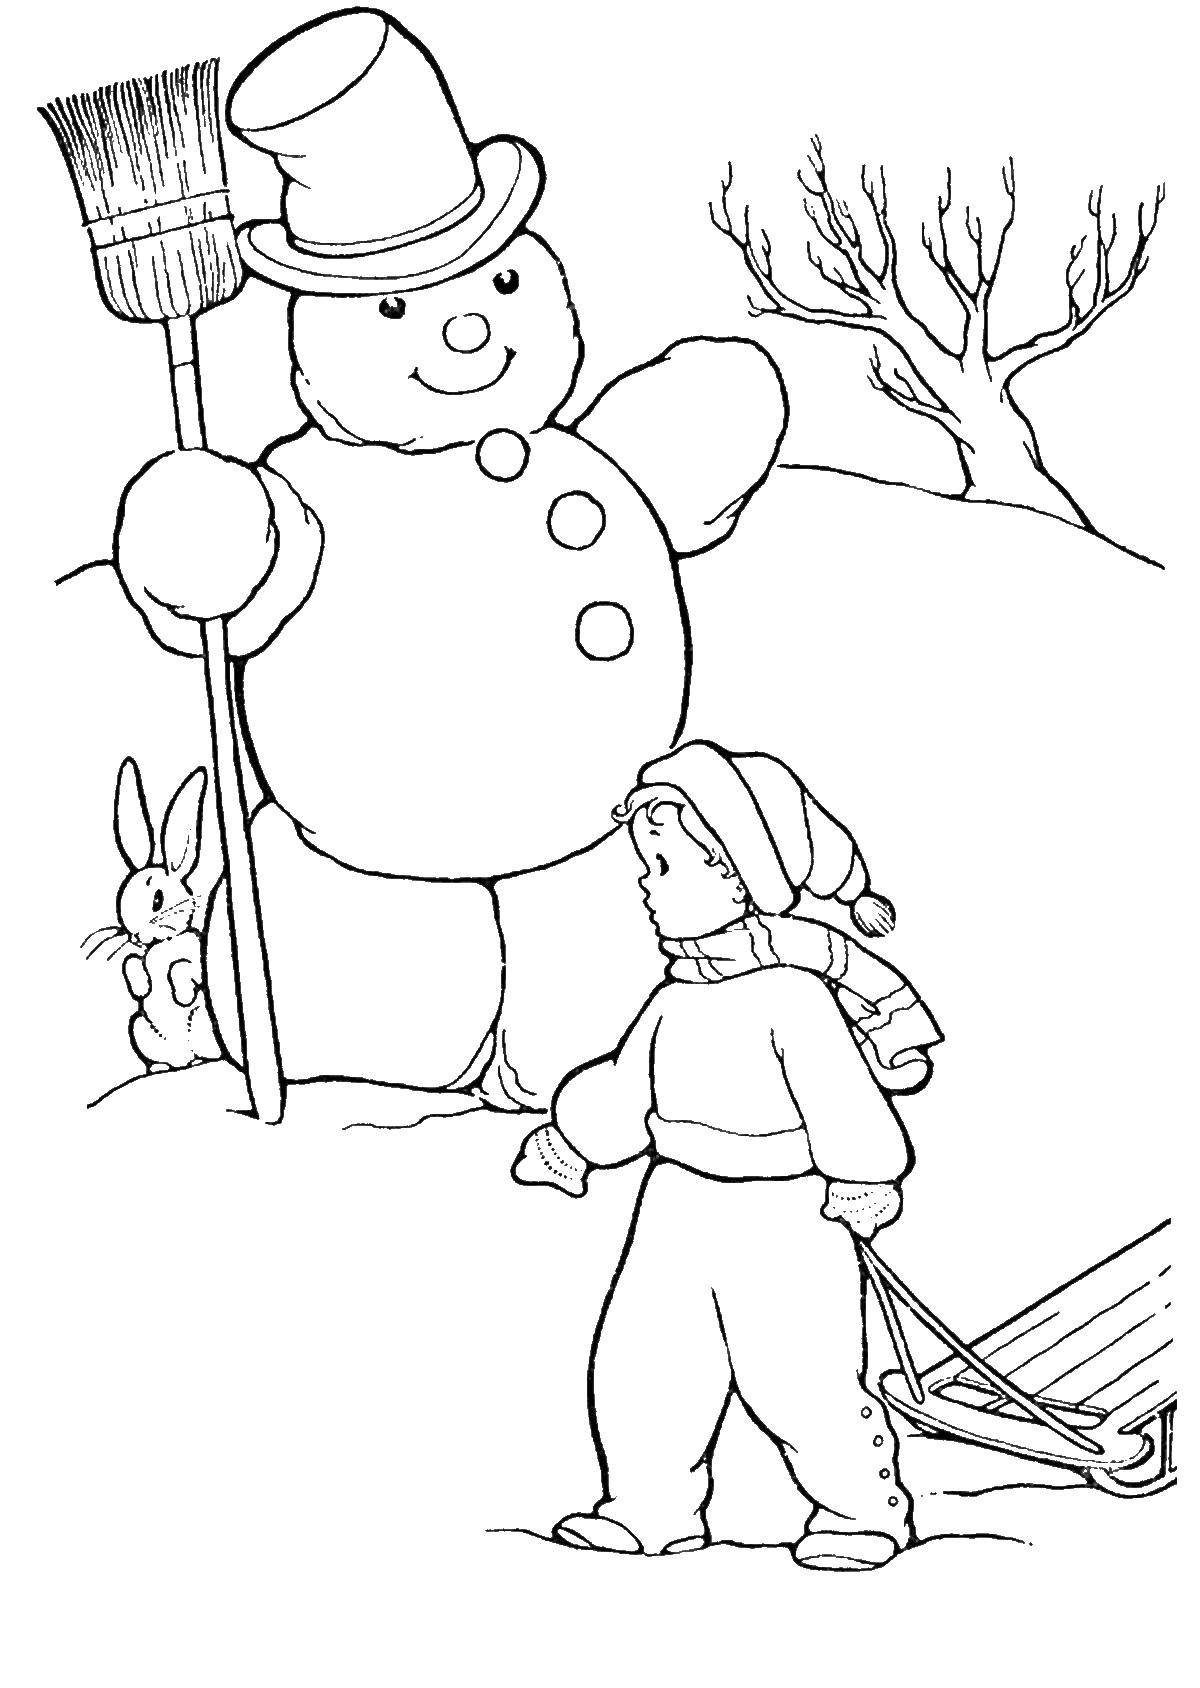 Coloring Boy with sled and snowman. Category snowman. Tags:  snowman, children.